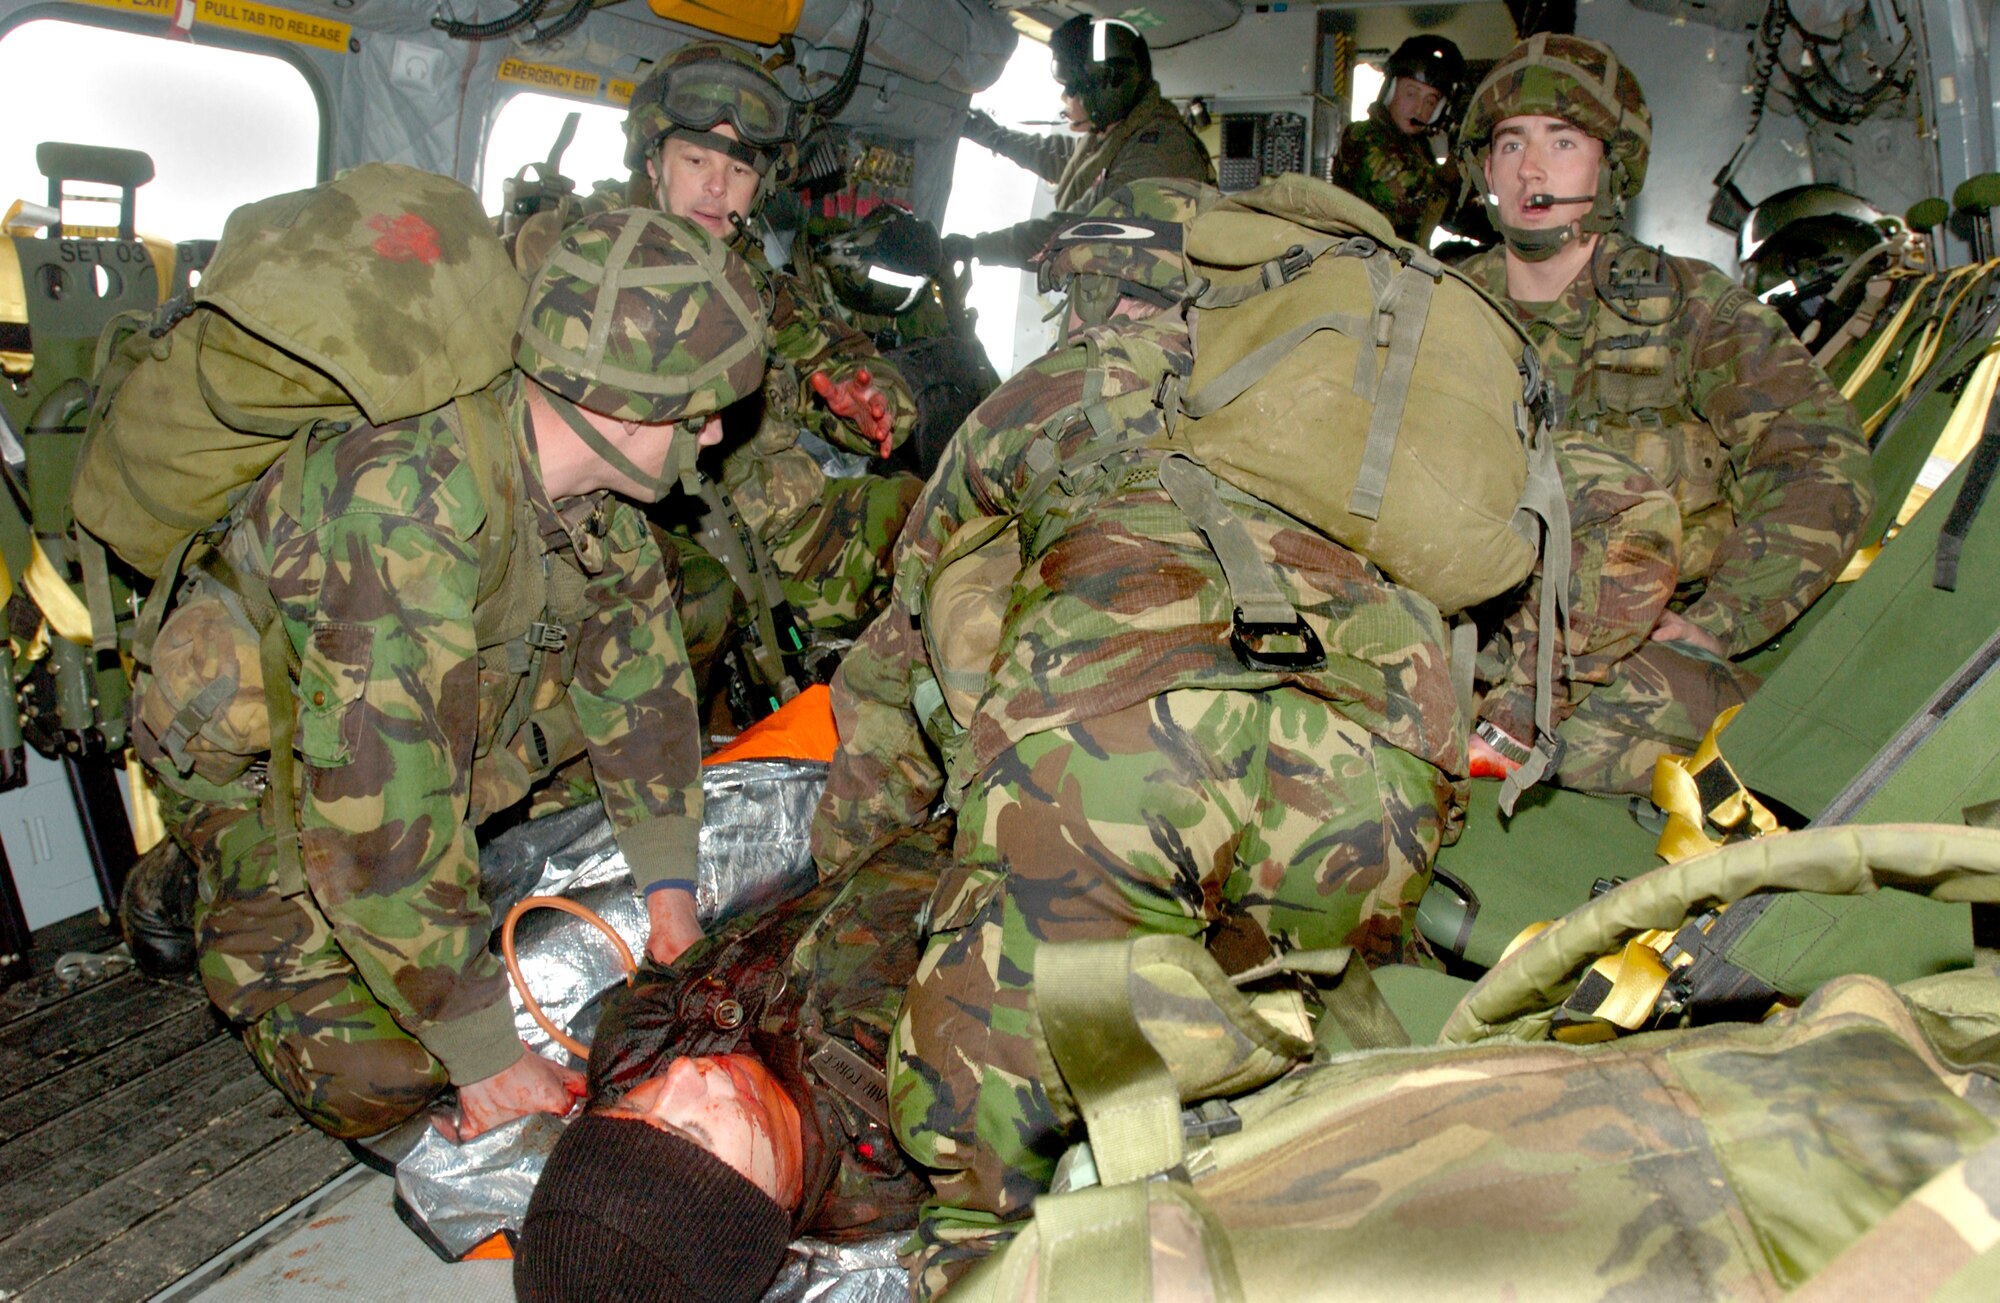 A team of 28 Squadron Royal Air Force Regiment combat medics care for a 'wounded' soldier aboard a casualty evacuation helicopter during a training scenario at Davidstow, North Cornwall, England. The RAF Regiment now uses volunteers who've lost a limb in battle but still want to serve as patients. Utilizing special moulage teams and the fact that the members already have a missing limb, combat medic trainers are able to give their new medics realistic human casualties to treat.  (Royal Air Force Photo by RAF Senior Aircraftman Chris Davidson)